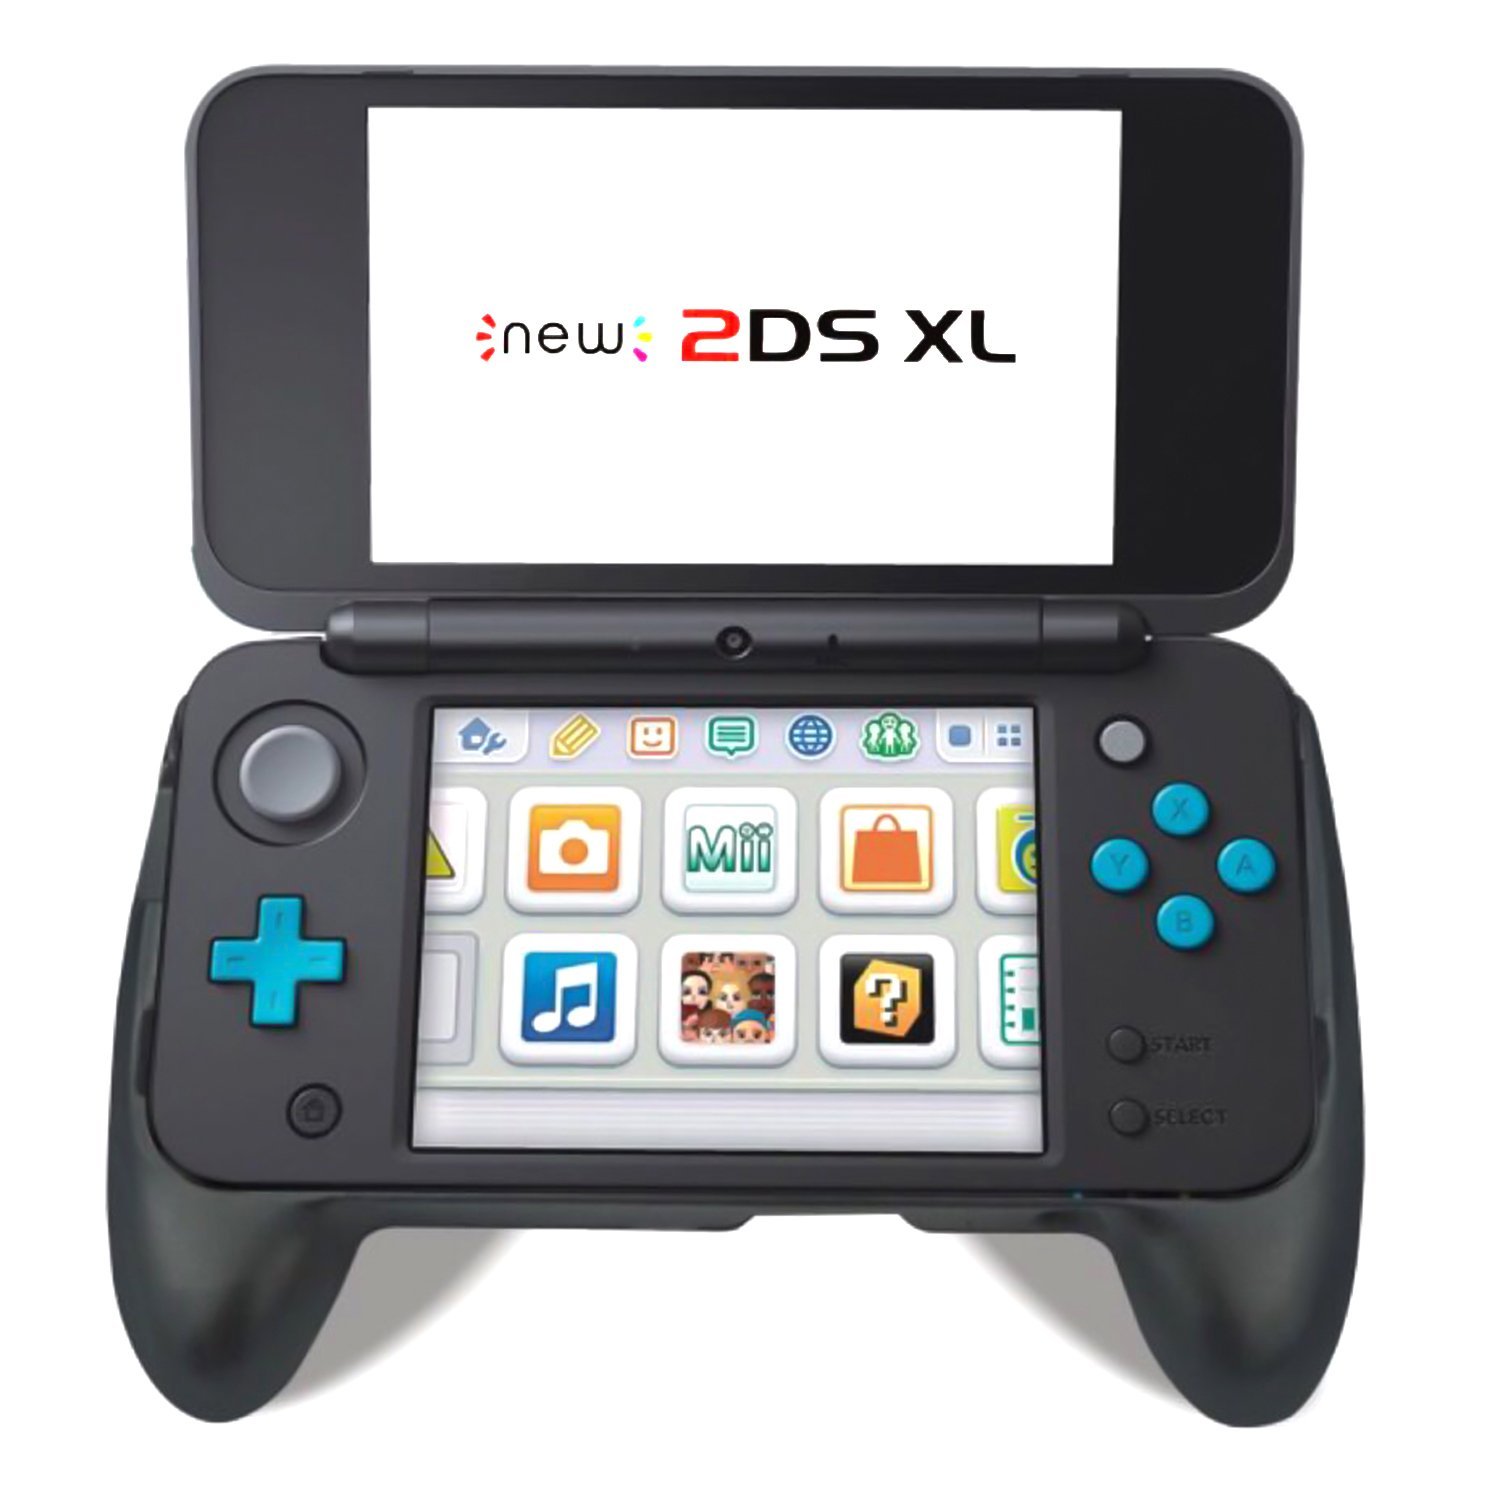 Best Accessories For The Nintendo 2DS XL